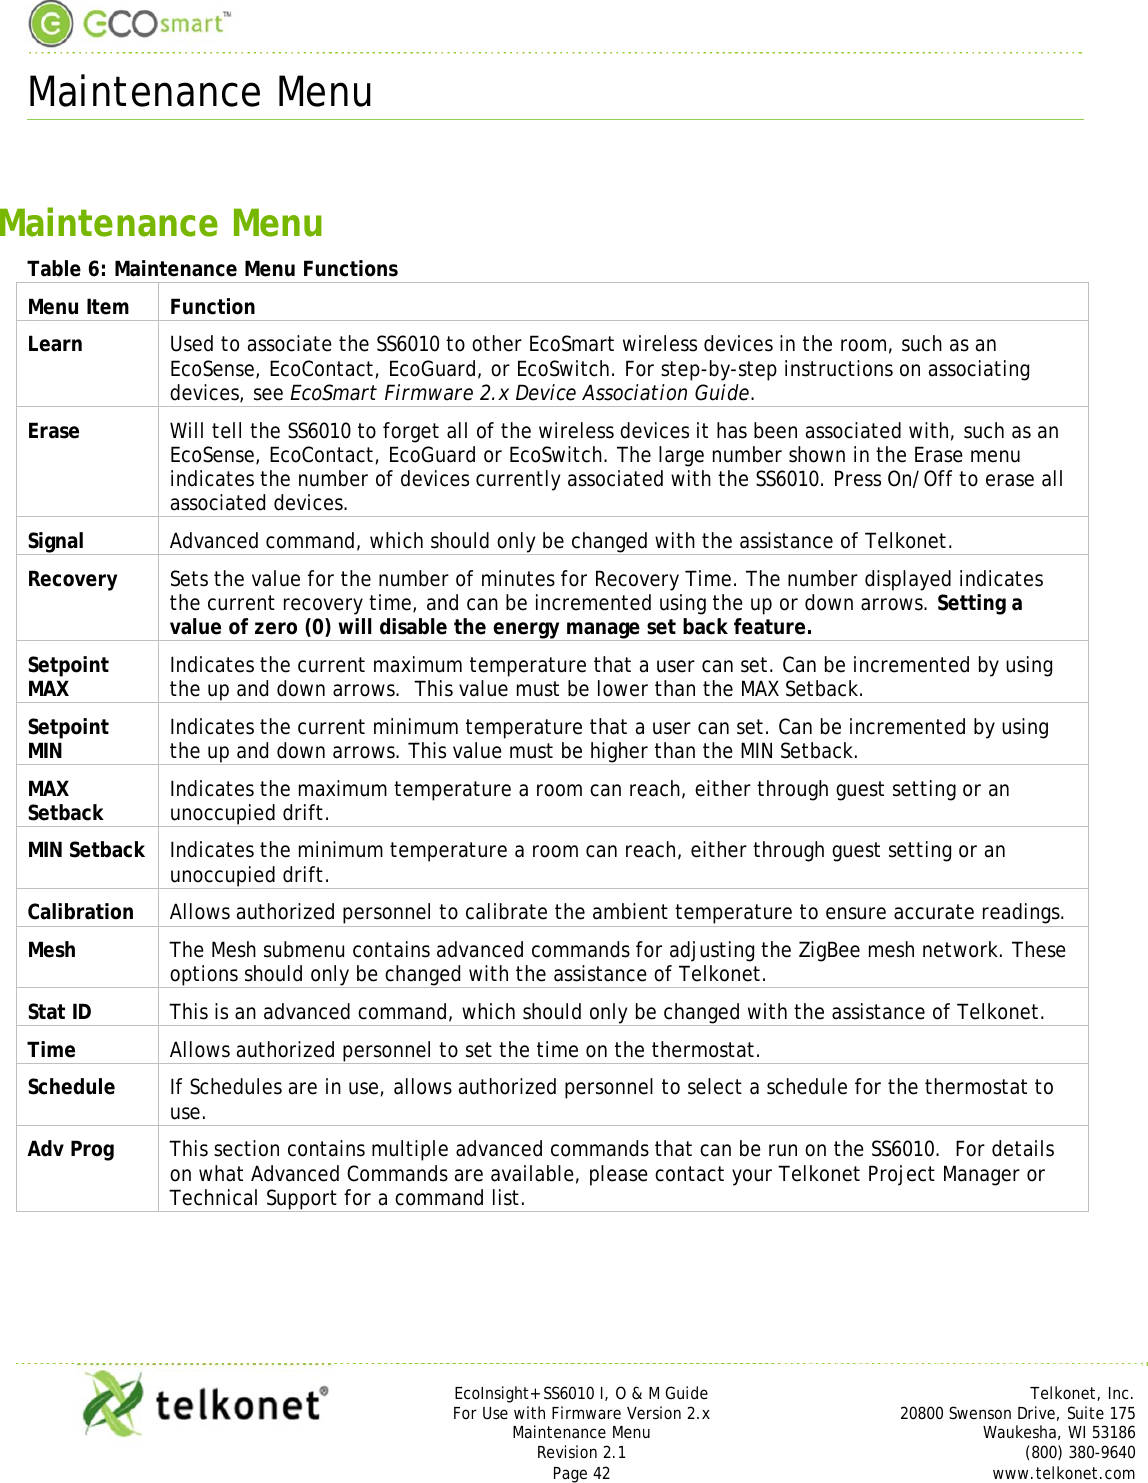  Maintenance Menu     EcoInsight+ SS6010 I, O &amp; M Guide Telkonet, Inc. For Use with Firmware Version 2.x 20800 Swenson Drive, Suite 175 Maintenance Menu Waukesha, WI 53186 Revision 2.1   (800) 380-9640 Page 42  www.telkonet.com  Maintenance Menu Table 6: Maintenance Menu Functions Menu Item  Function Learn  Used to associate the SS6010 to other EcoSmart wireless devices in the room, such as an EcoSense, EcoContact, EcoGuard, or EcoSwitch. For step-by-step instructions on associating devices, see EcoSmart Firmware 2.x Device Association Guide. Erase  Will tell the SS6010 to forget all of the wireless devices it has been associated with, such as an EcoSense, EcoContact, EcoGuard or EcoSwitch. The large number shown in the Erase menu indicates the number of devices currently associated with the SS6010. Press On/Off to erase all associated devices. Signal  Advanced command, which should only be changed with the assistance of Telkonet. Recovery  Sets the value for the number of minutes for Recovery Time. The number displayed indicates the current recovery time, and can be incremented using the up or down arrows. Setting a value of zero (0) will disable the energy manage set back feature. Setpoint MAX  Indicates the current maximum temperature that a user can set. Can be incremented by using the up and down arrows.  This value must be lower than the MAX Setback. Setpoint MIN  Indicates the current minimum temperature that a user can set. Can be incremented by using the up and down arrows. This value must be higher than the MIN Setback. MAX Setback  Indicates the maximum temperature a room can reach, either through guest setting or an unoccupied drift. MIN Setback  Indicates the minimum temperature a room can reach, either through guest setting or an unoccupied drift. Calibration  Allows authorized personnel to calibrate the ambient temperature to ensure accurate readings. Mesh  The Mesh submenu contains advanced commands for adjusting the ZigBee mesh network. These options should only be changed with the assistance of Telkonet. Stat ID  This is an advanced command, which should only be changed with the assistance of Telkonet. Time  Allows authorized personnel to set the time on the thermostat. Schedule  If Schedules are in use, allows authorized personnel to select a schedule for the thermostat to use. Adv Prog  This section contains multiple advanced commands that can be run on the SS6010.  For details on what Advanced Commands are available, please contact your Telkonet Project Manager or Technical Support for a command list.    